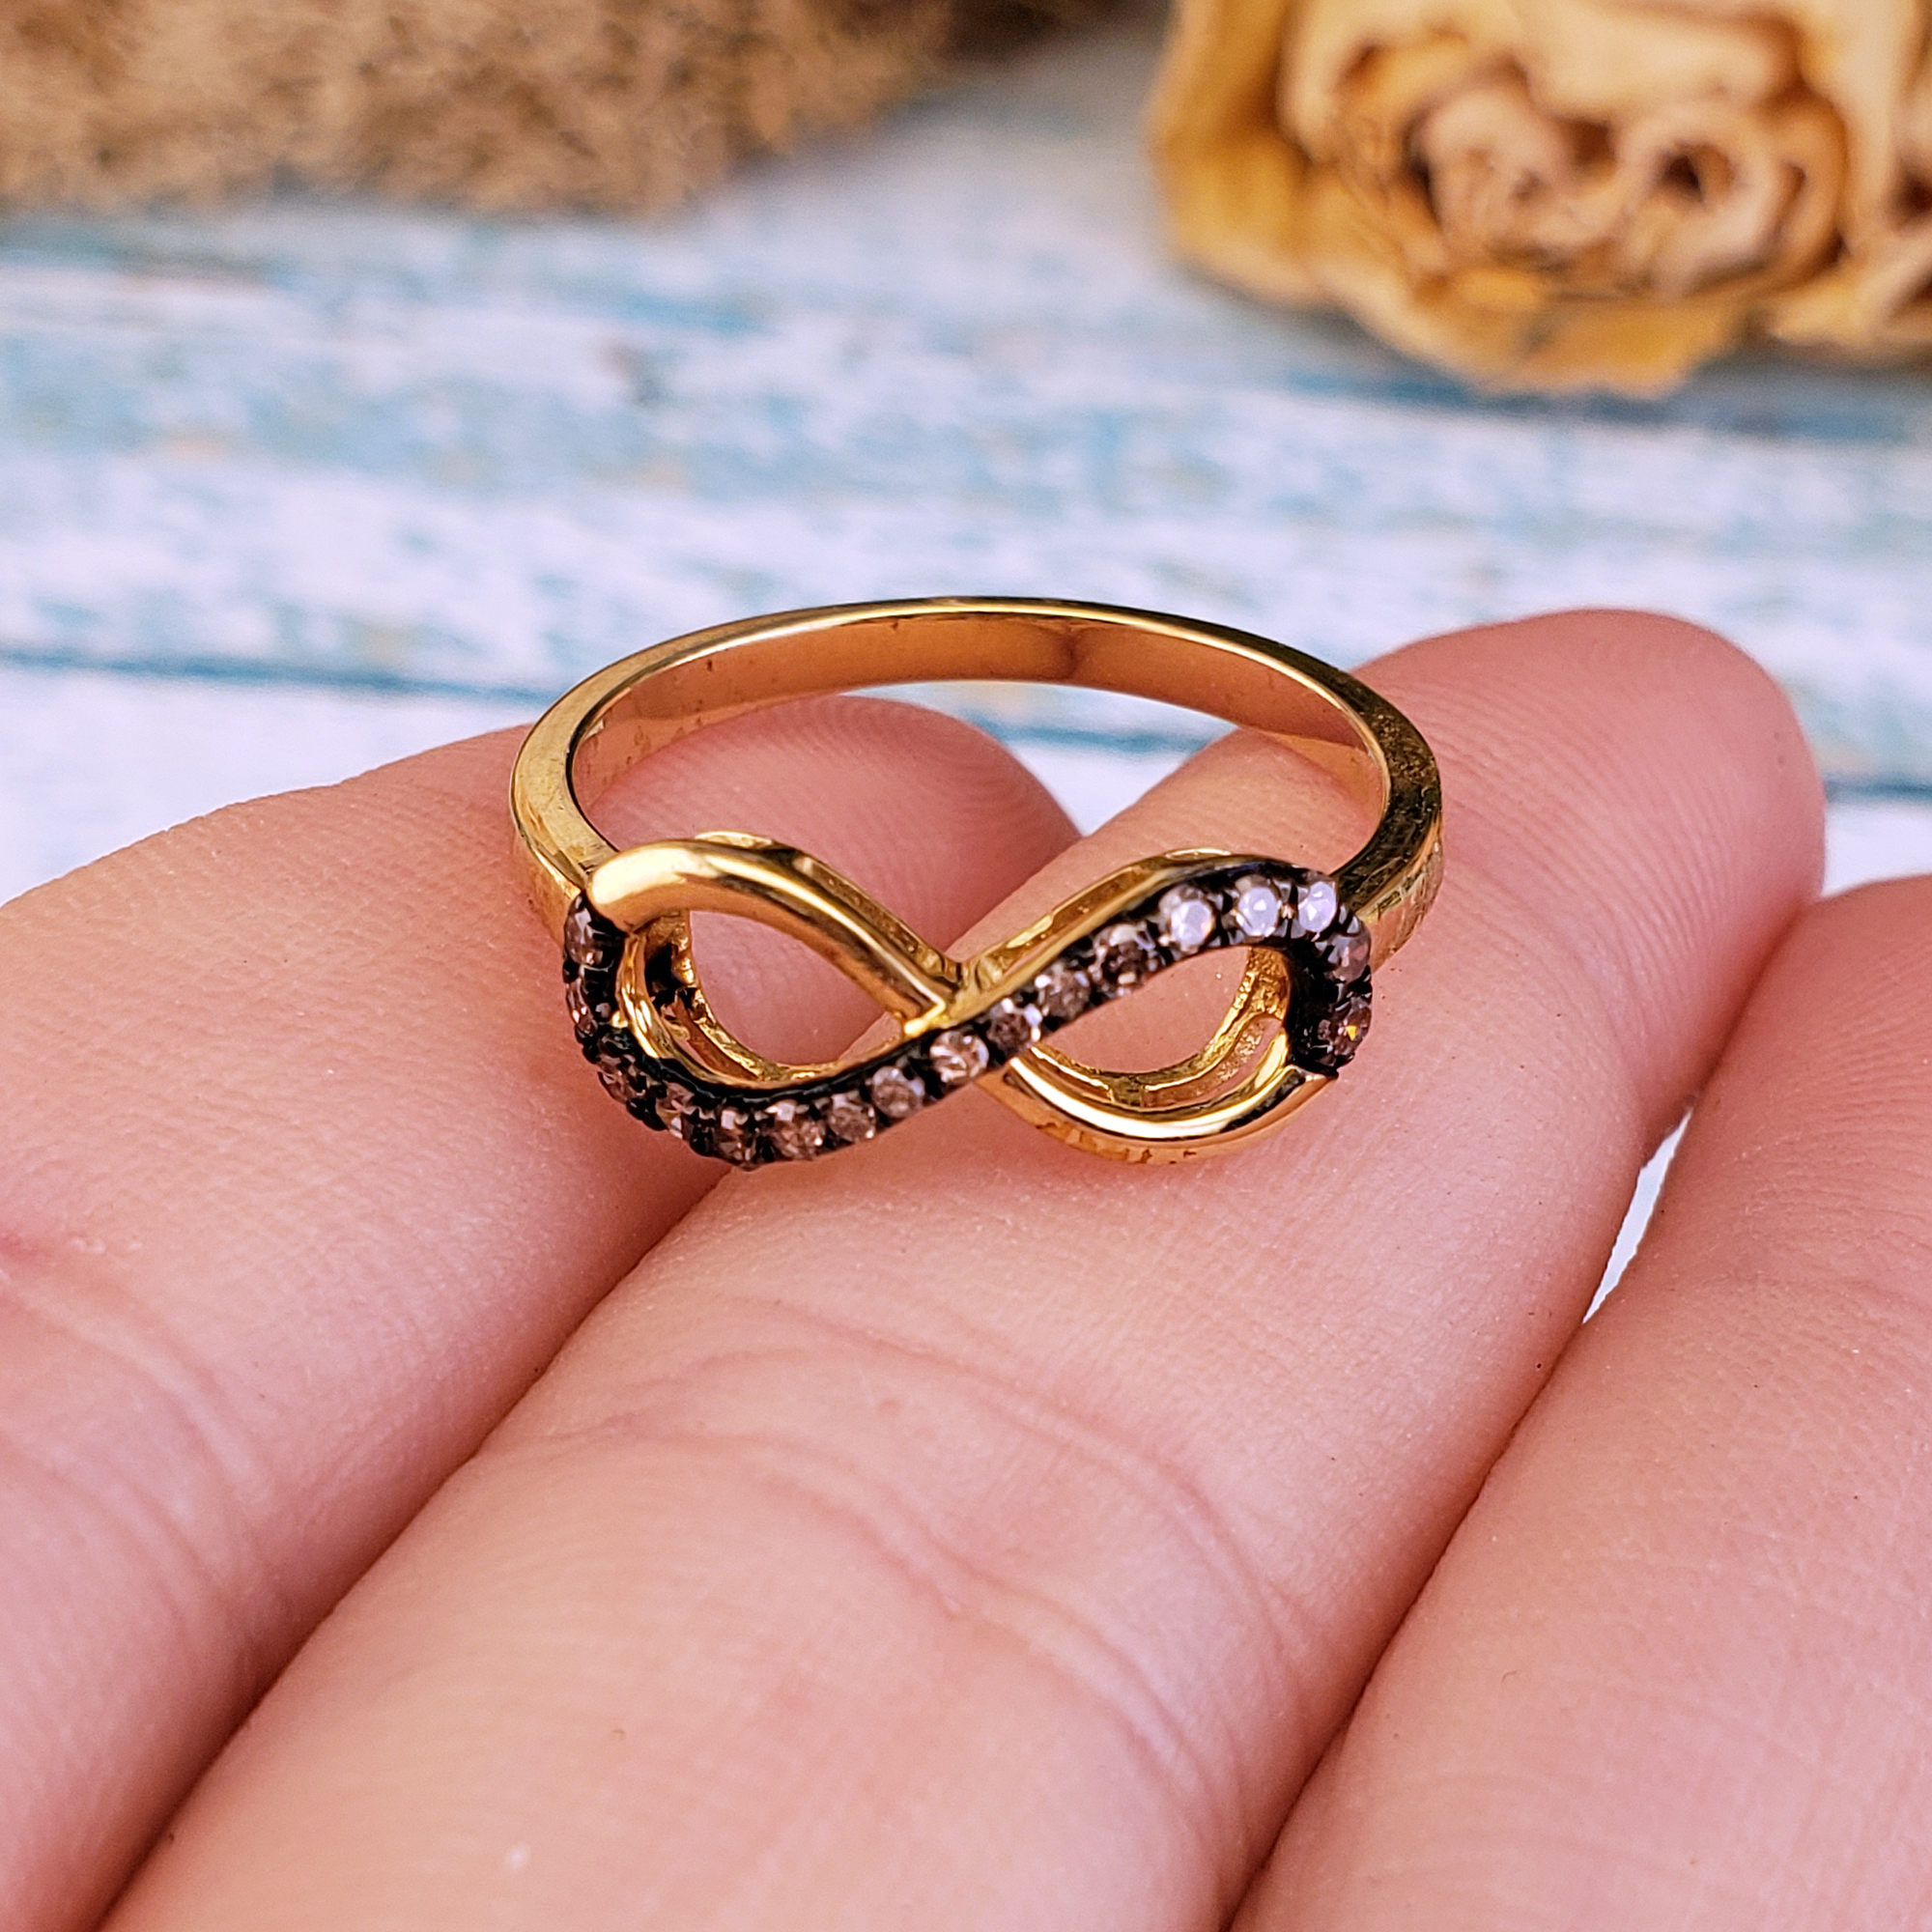 Infinity Symbol 10k Yellow Gold Champagne Diamond Ring - Size 6.75 - Close Up In Hand